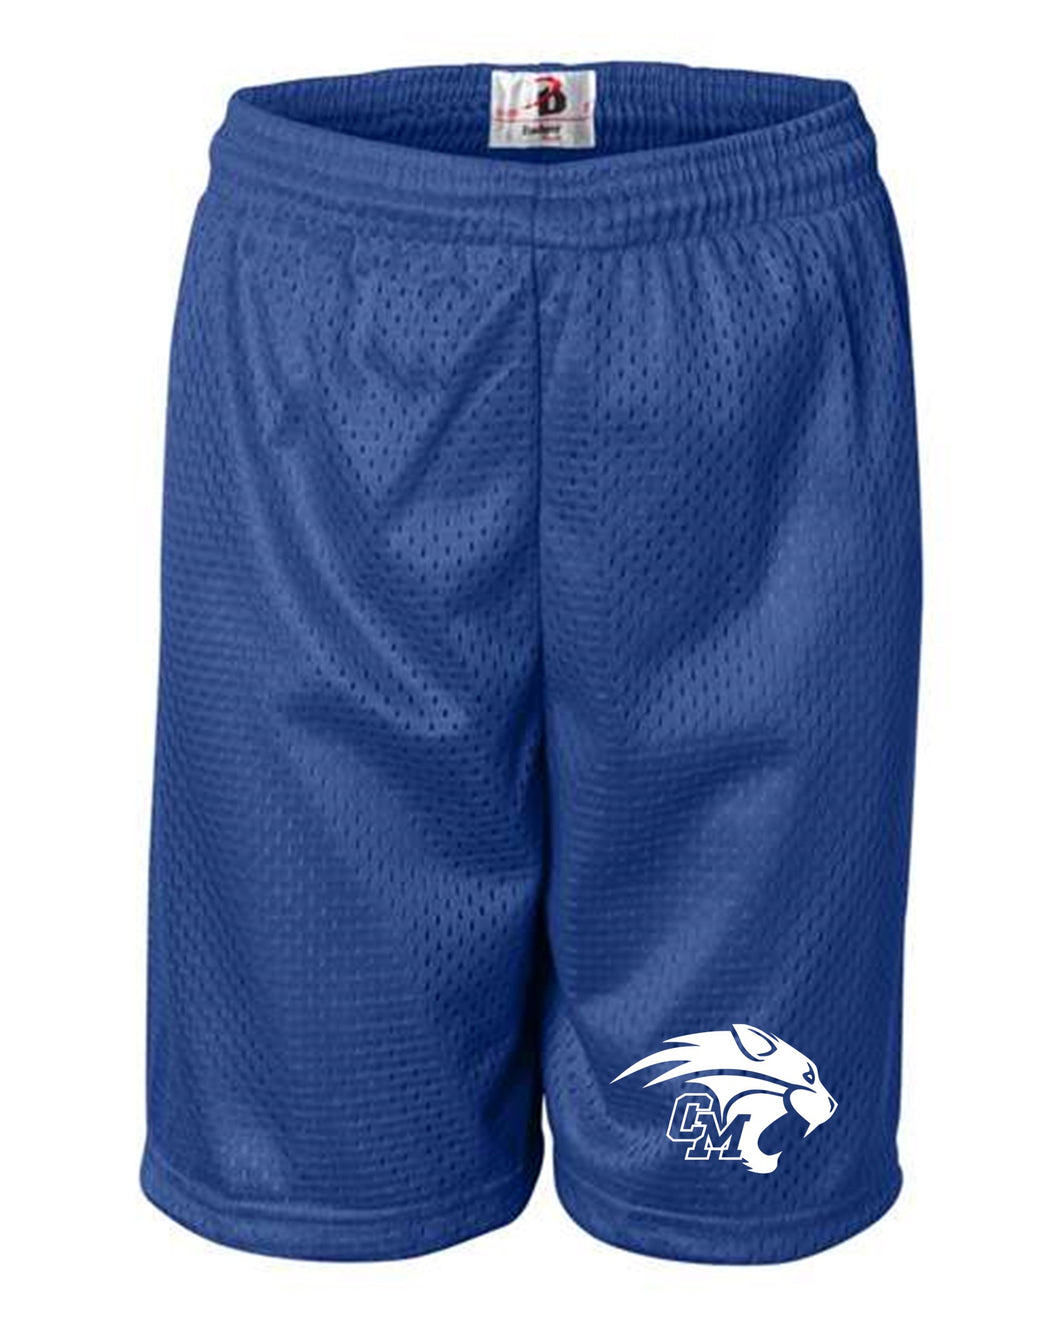 Central Mountain Wildcat Wrestling Shorts - Click for Additional Styles (Youth and Adult)